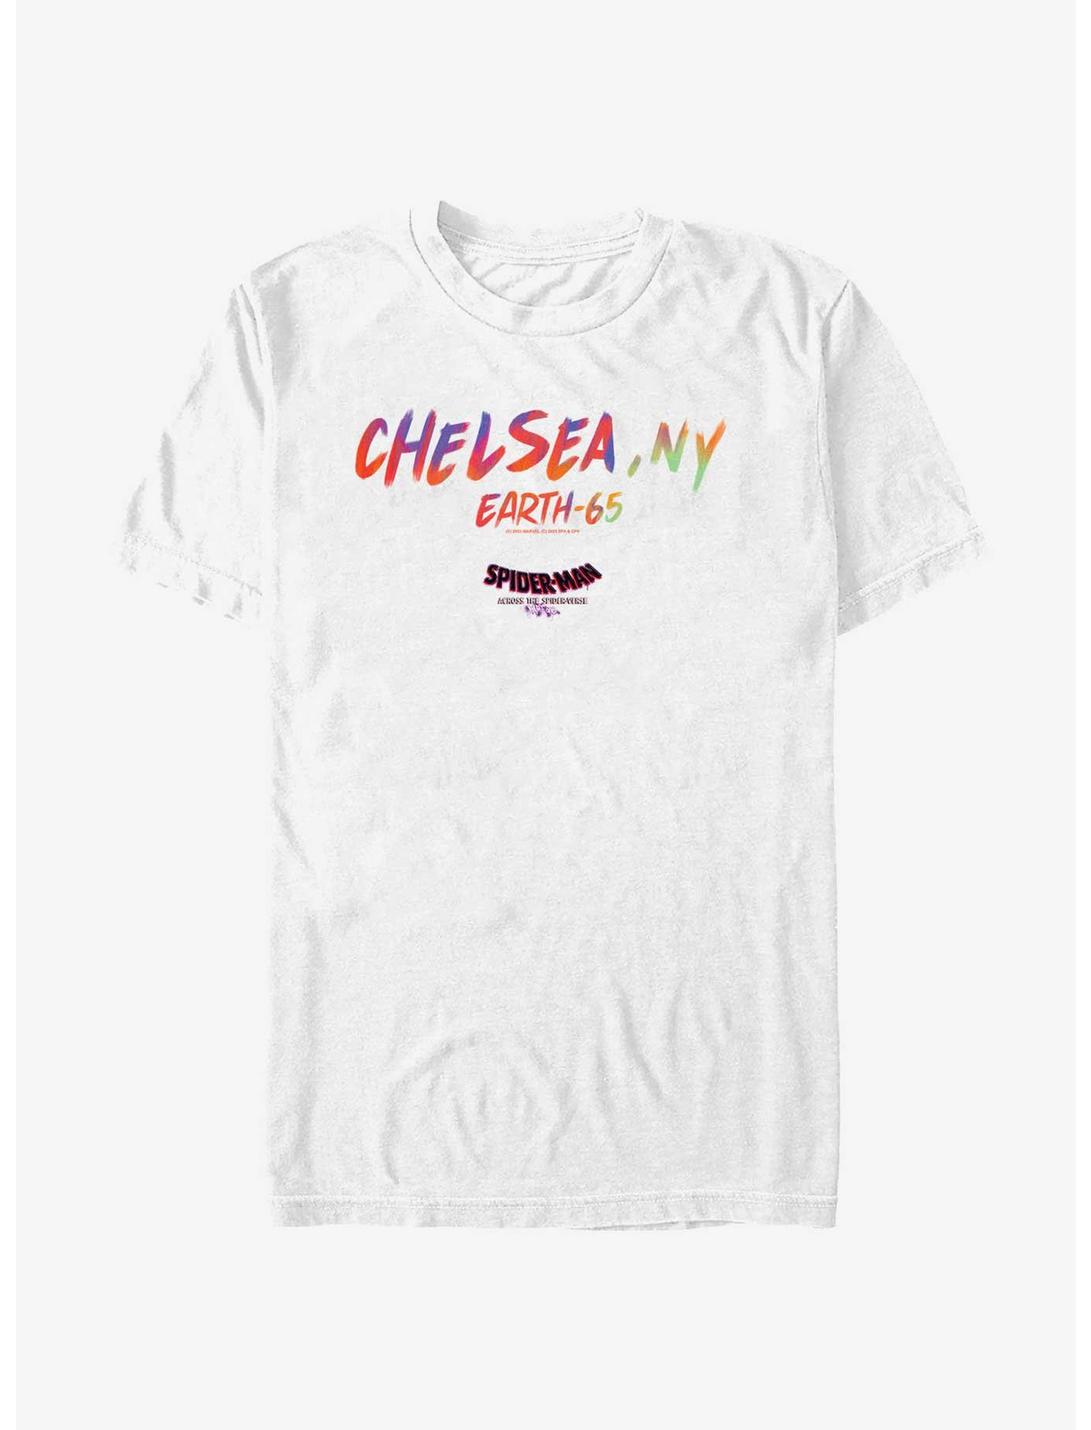 Marvel Spider-Man: Across The Spider-Verse Chelsea NY Earth-65 T-Shirt, WHITE, hi-res